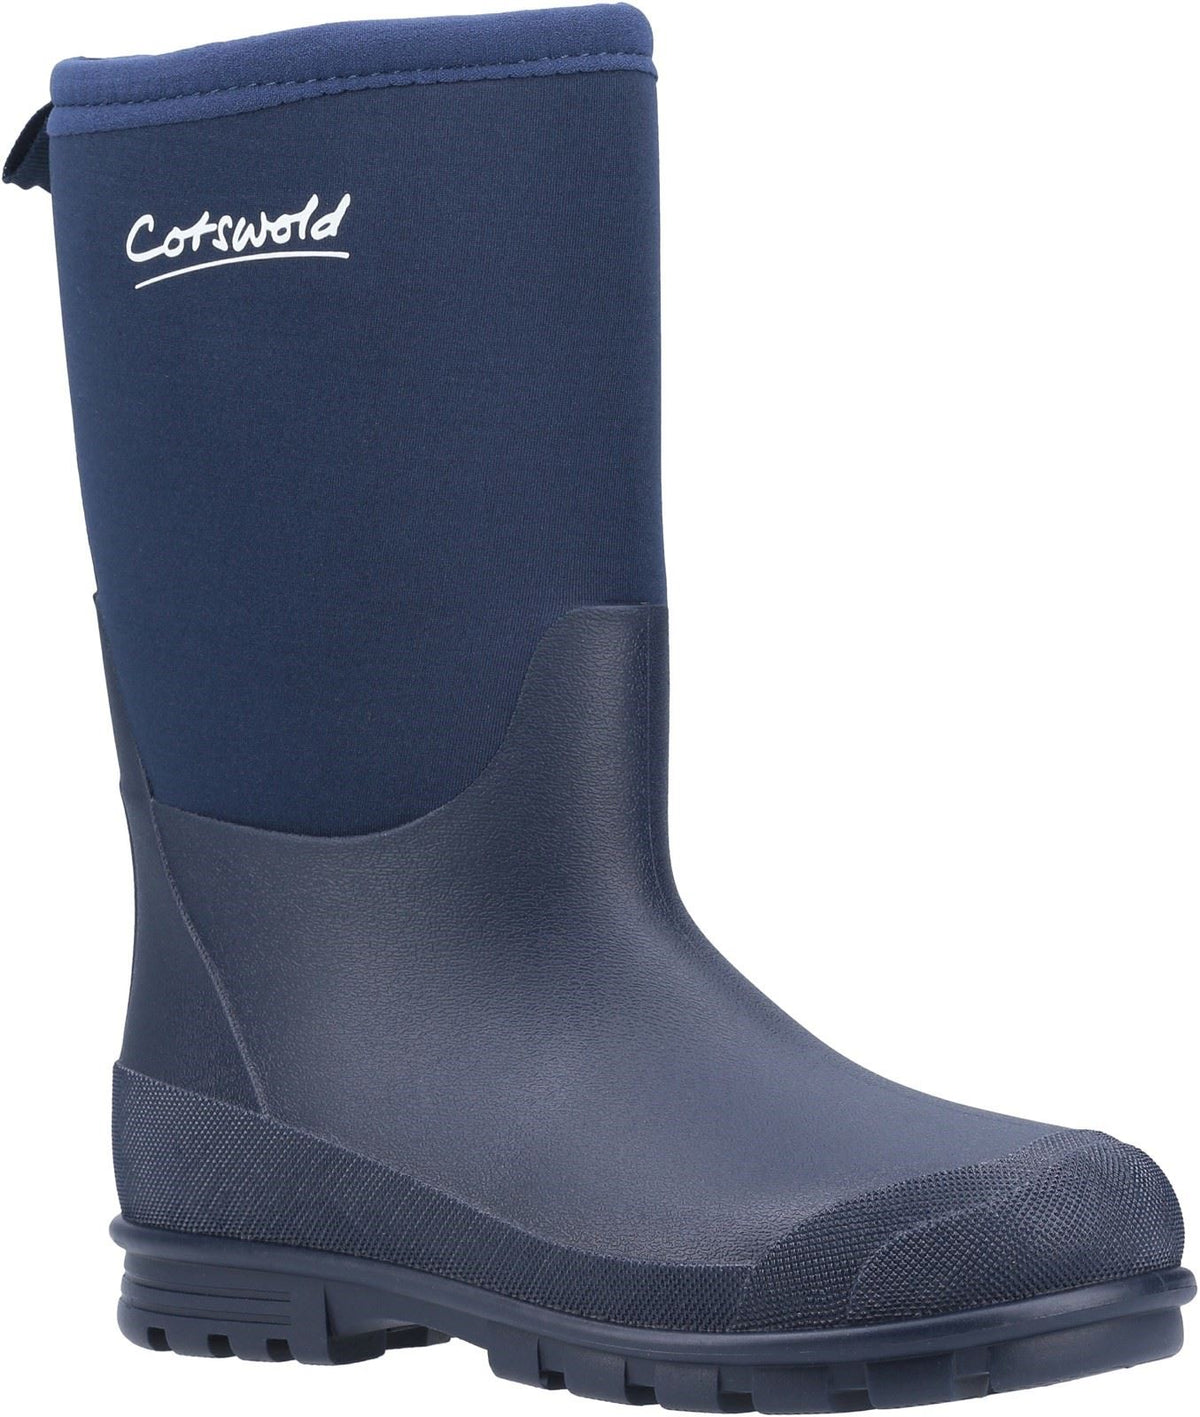 Cotswold Hilly Neoprene Childrens Wellington Boots